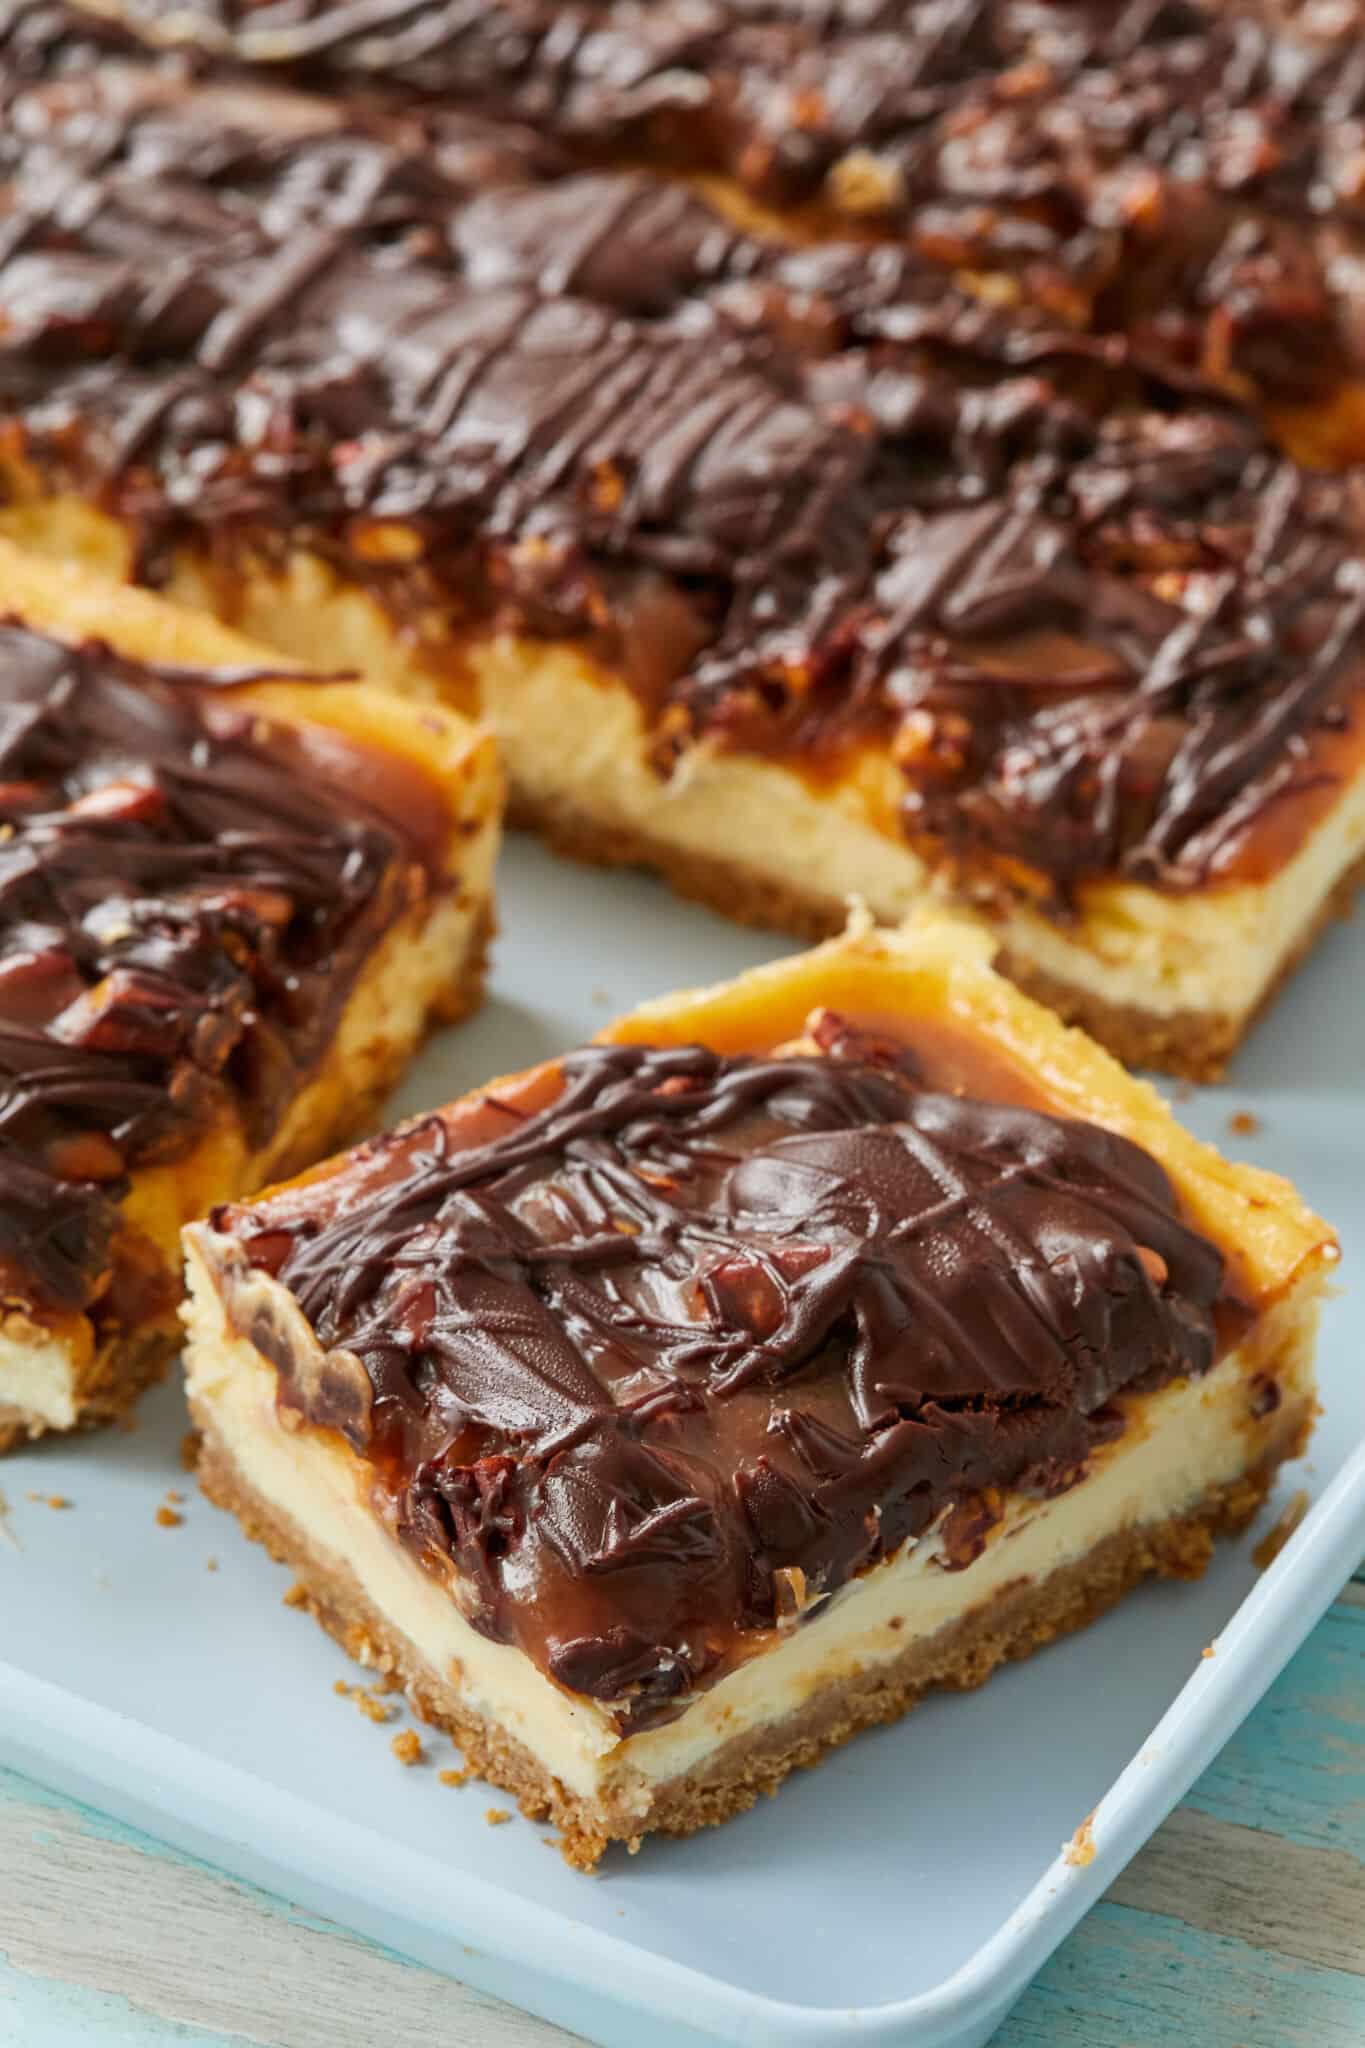 Turtle Cheesecake Bars are baked and cut into squares in a light blue baking pan. They have thick, crumbly graham cracker crust, topped with velvety cheesecake filling covered in buttery caramel, nuts, and drizzled with decadent chocolate ganache.